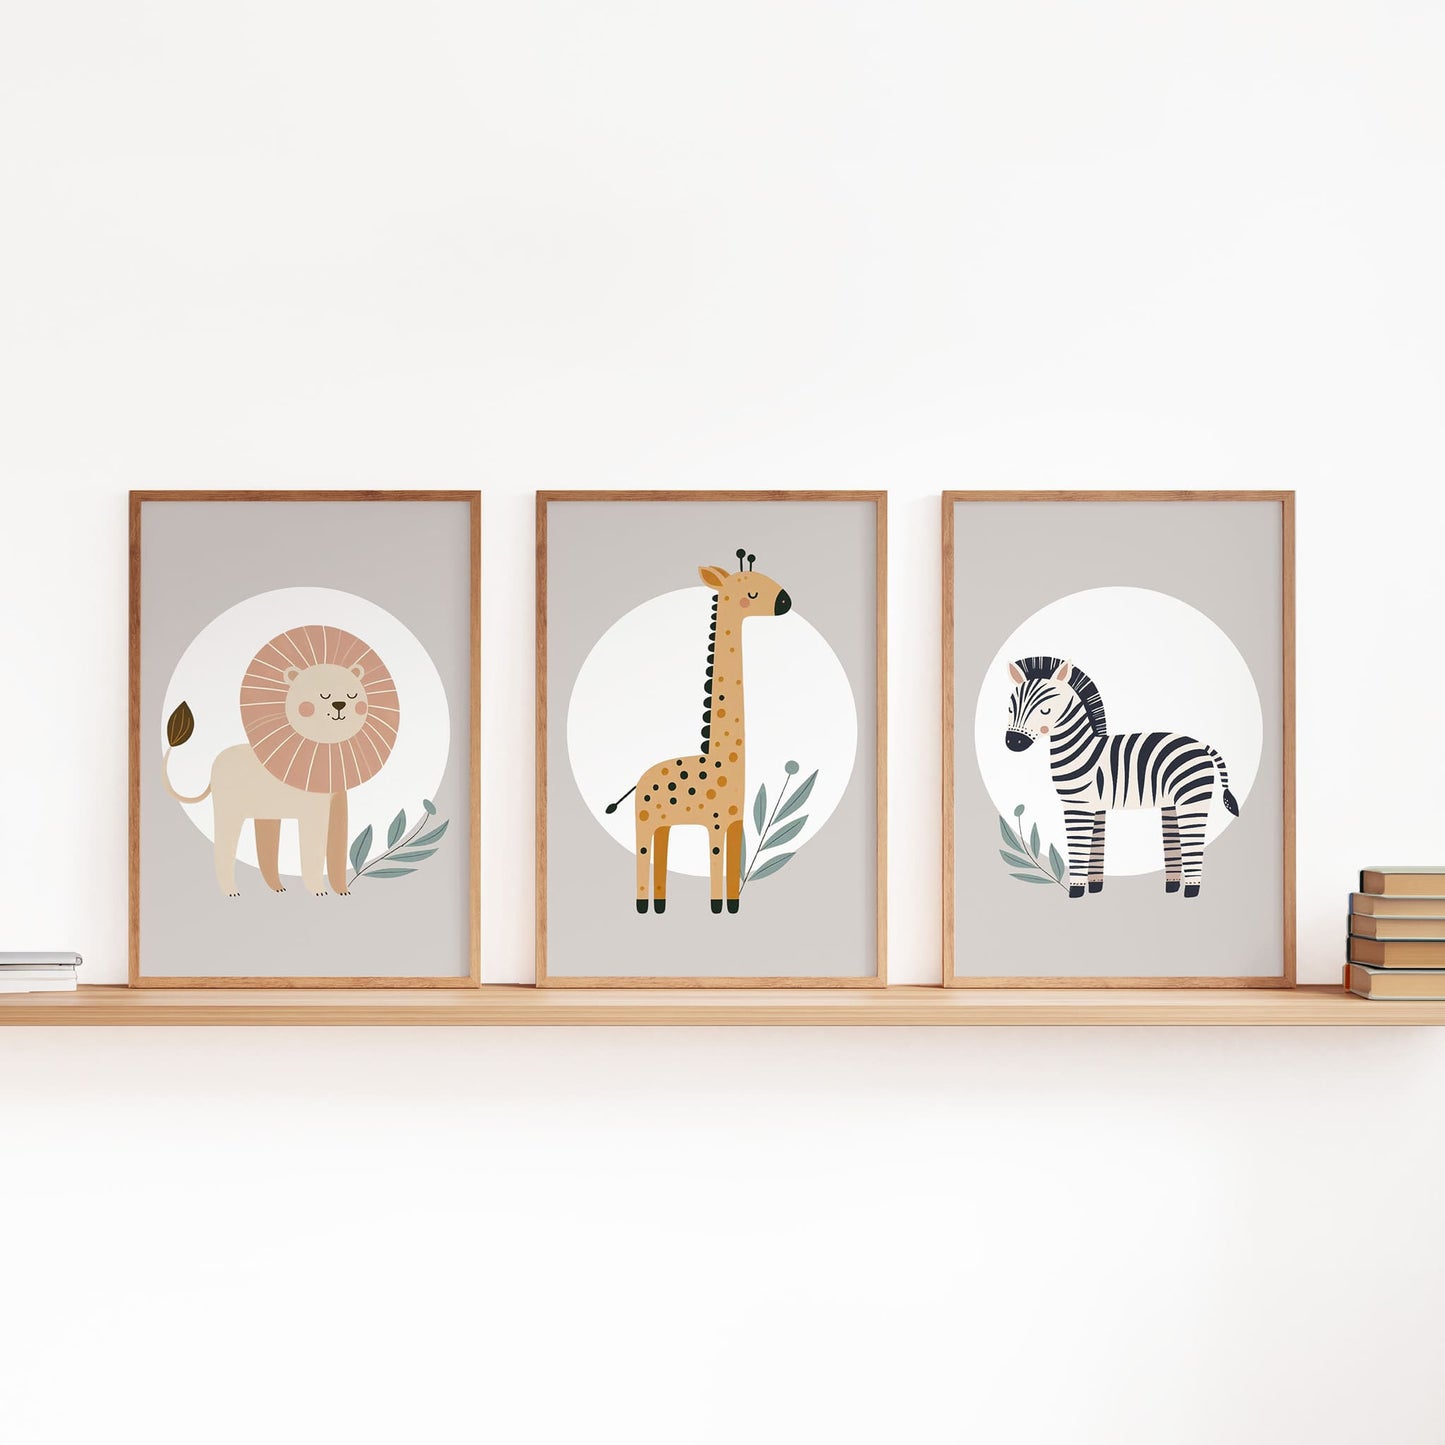 Set of three A4 prints featuring minimalist illustrations in muted tones. Each print depicts a different animal: a lion, a zebra, and a giraffe. The background is tan coloured with a white circle on which the animal is overlaid.